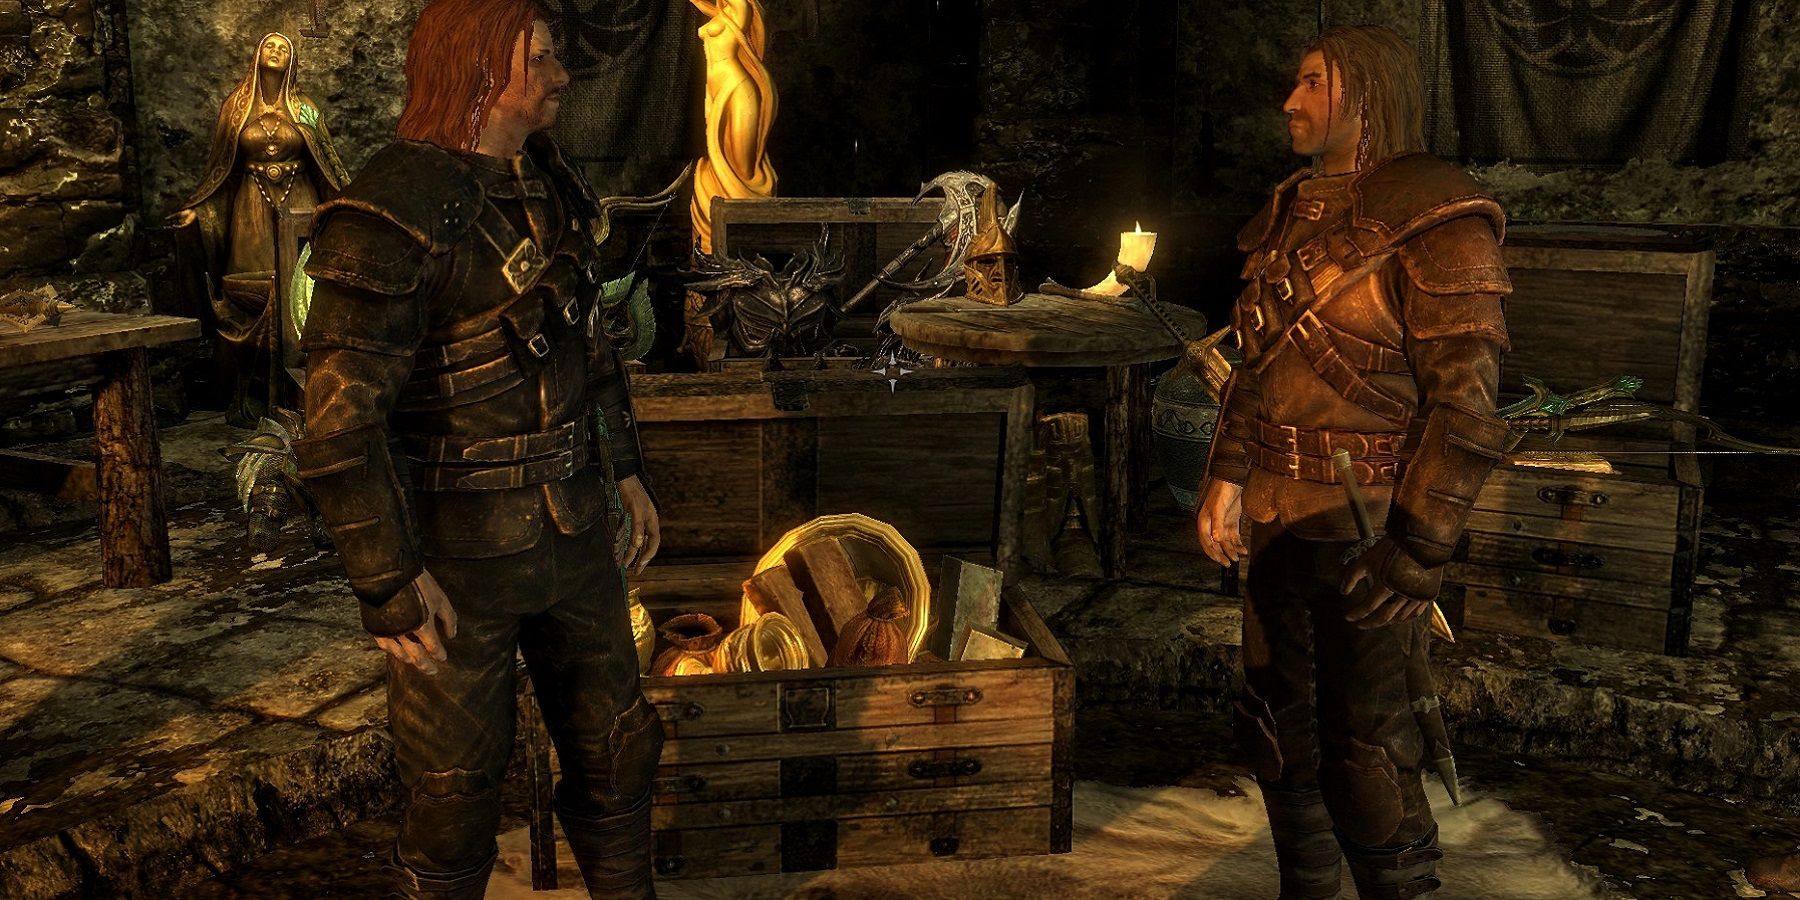 Image from a Skyrim mod showing Brynjolf of the Thieves Guild.